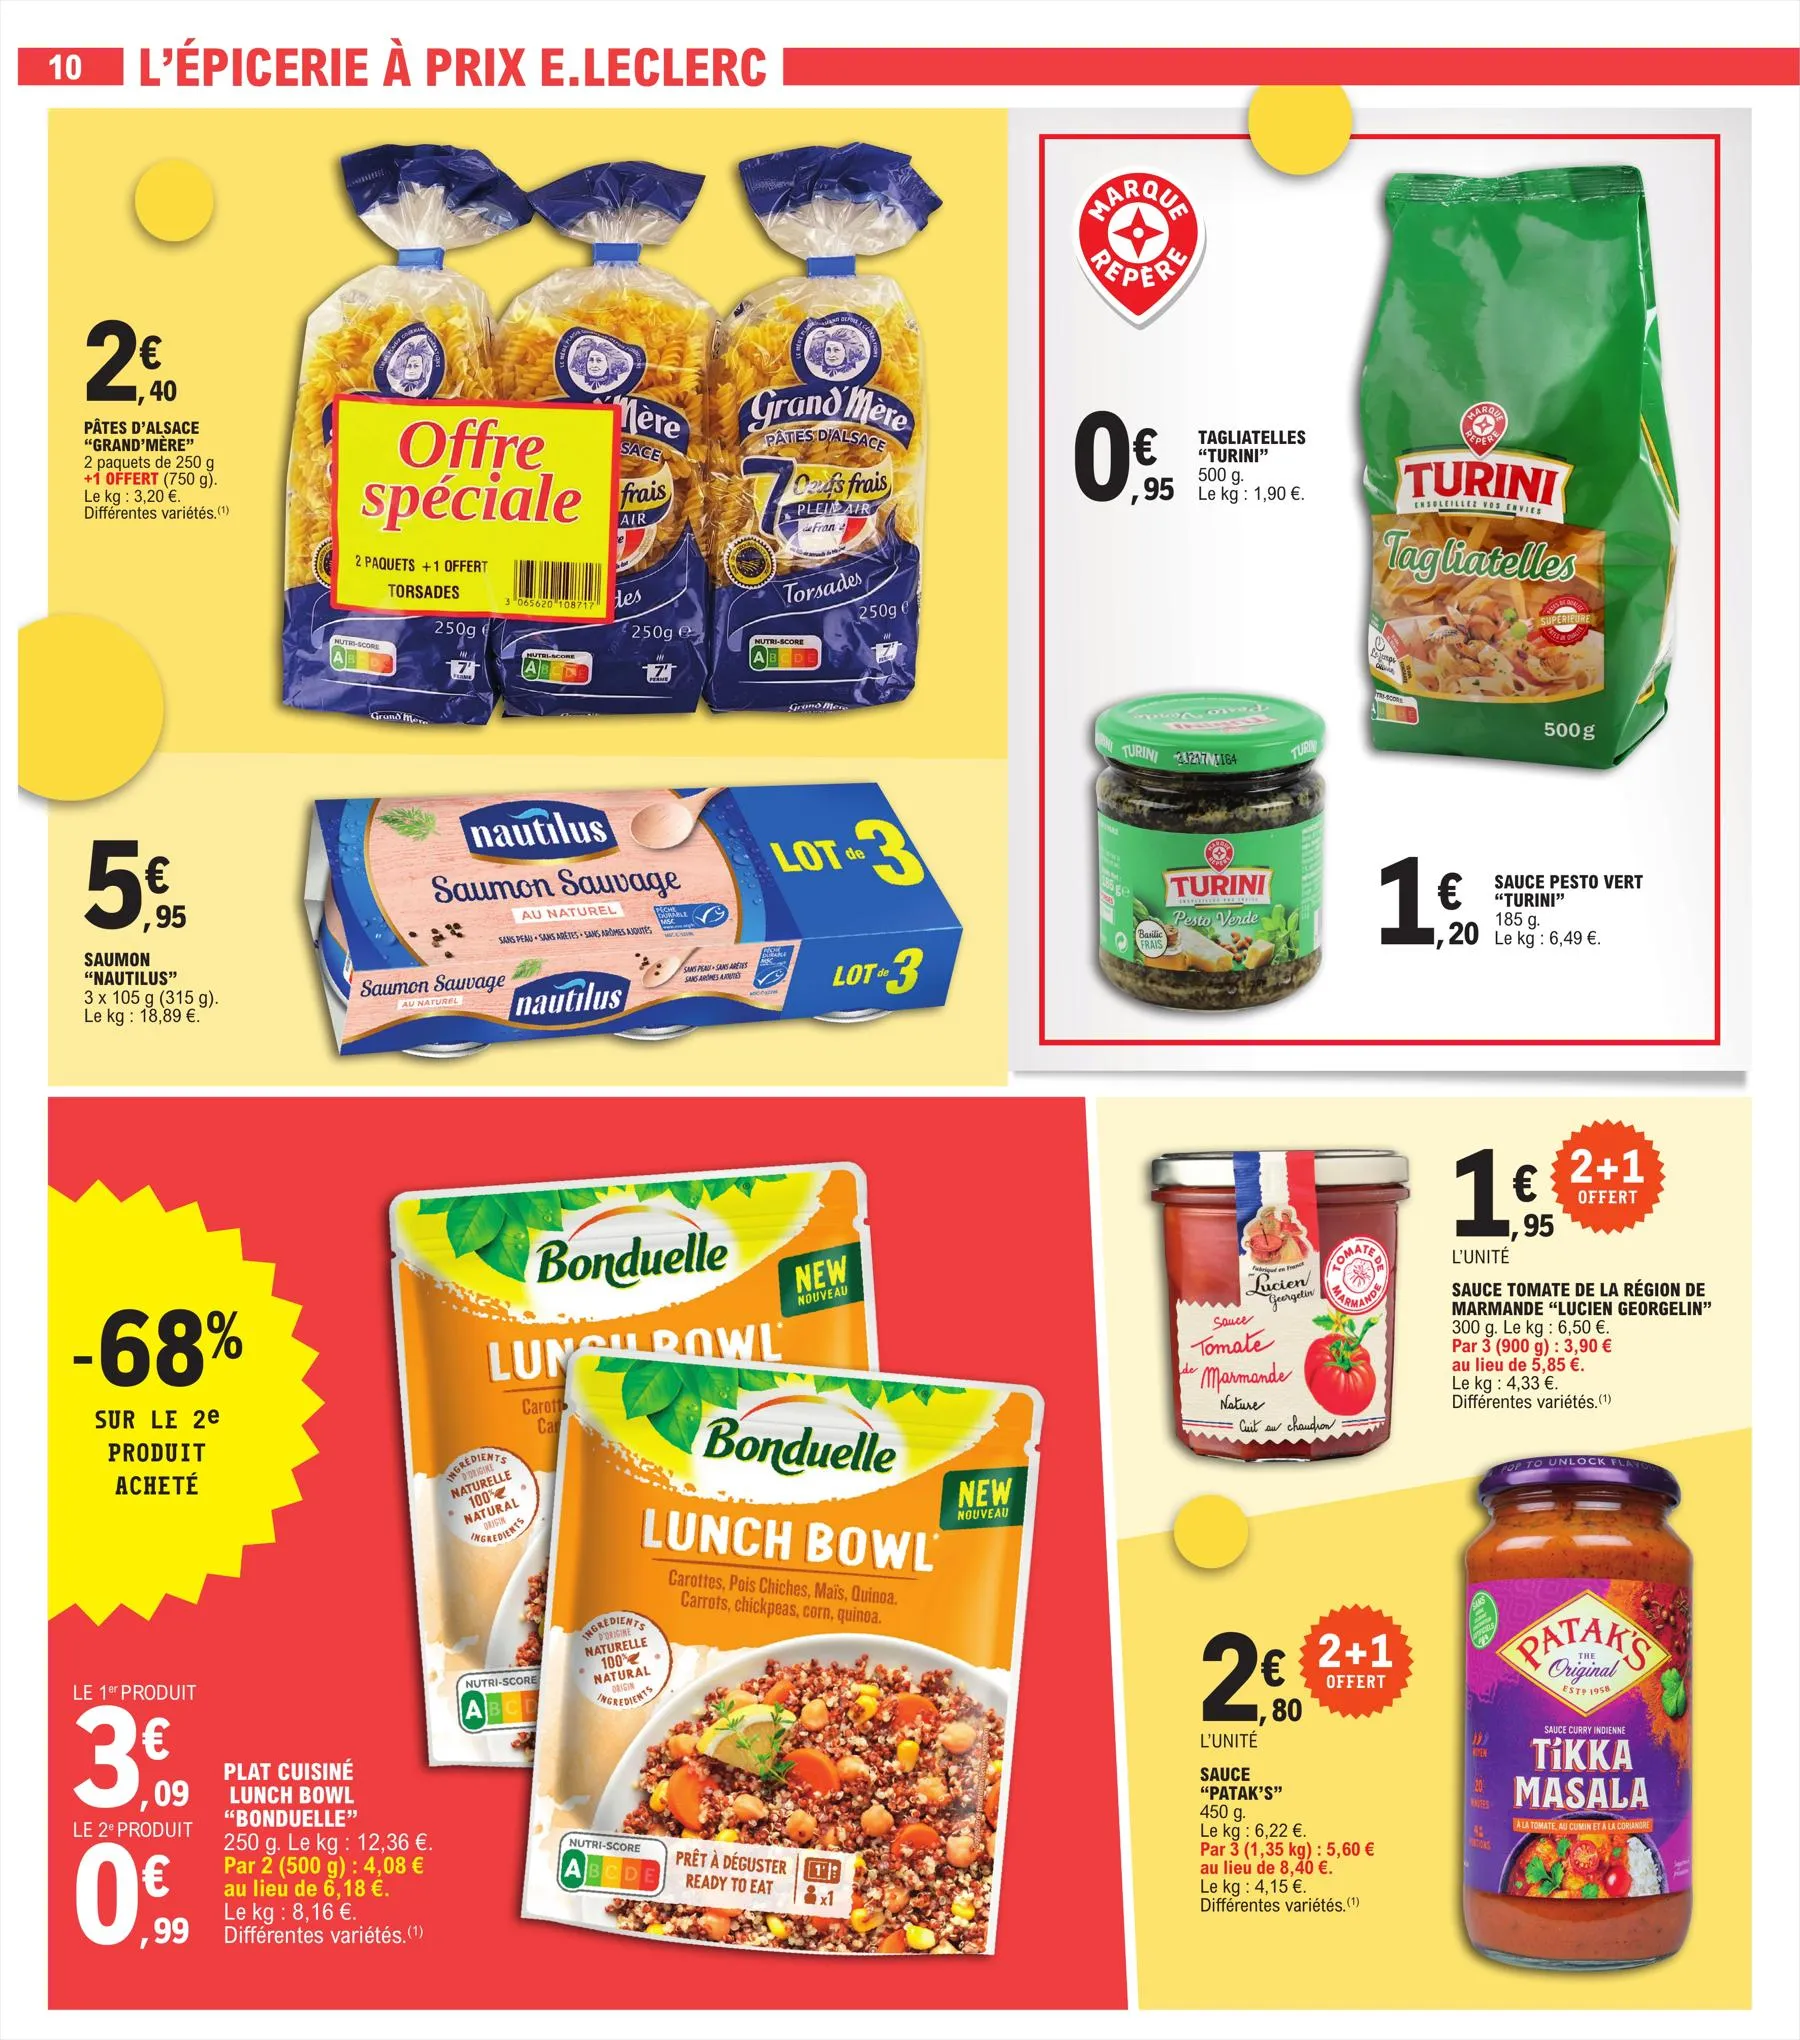 Catalogue Relance Alimentaire 11 - Mixte, page 00010